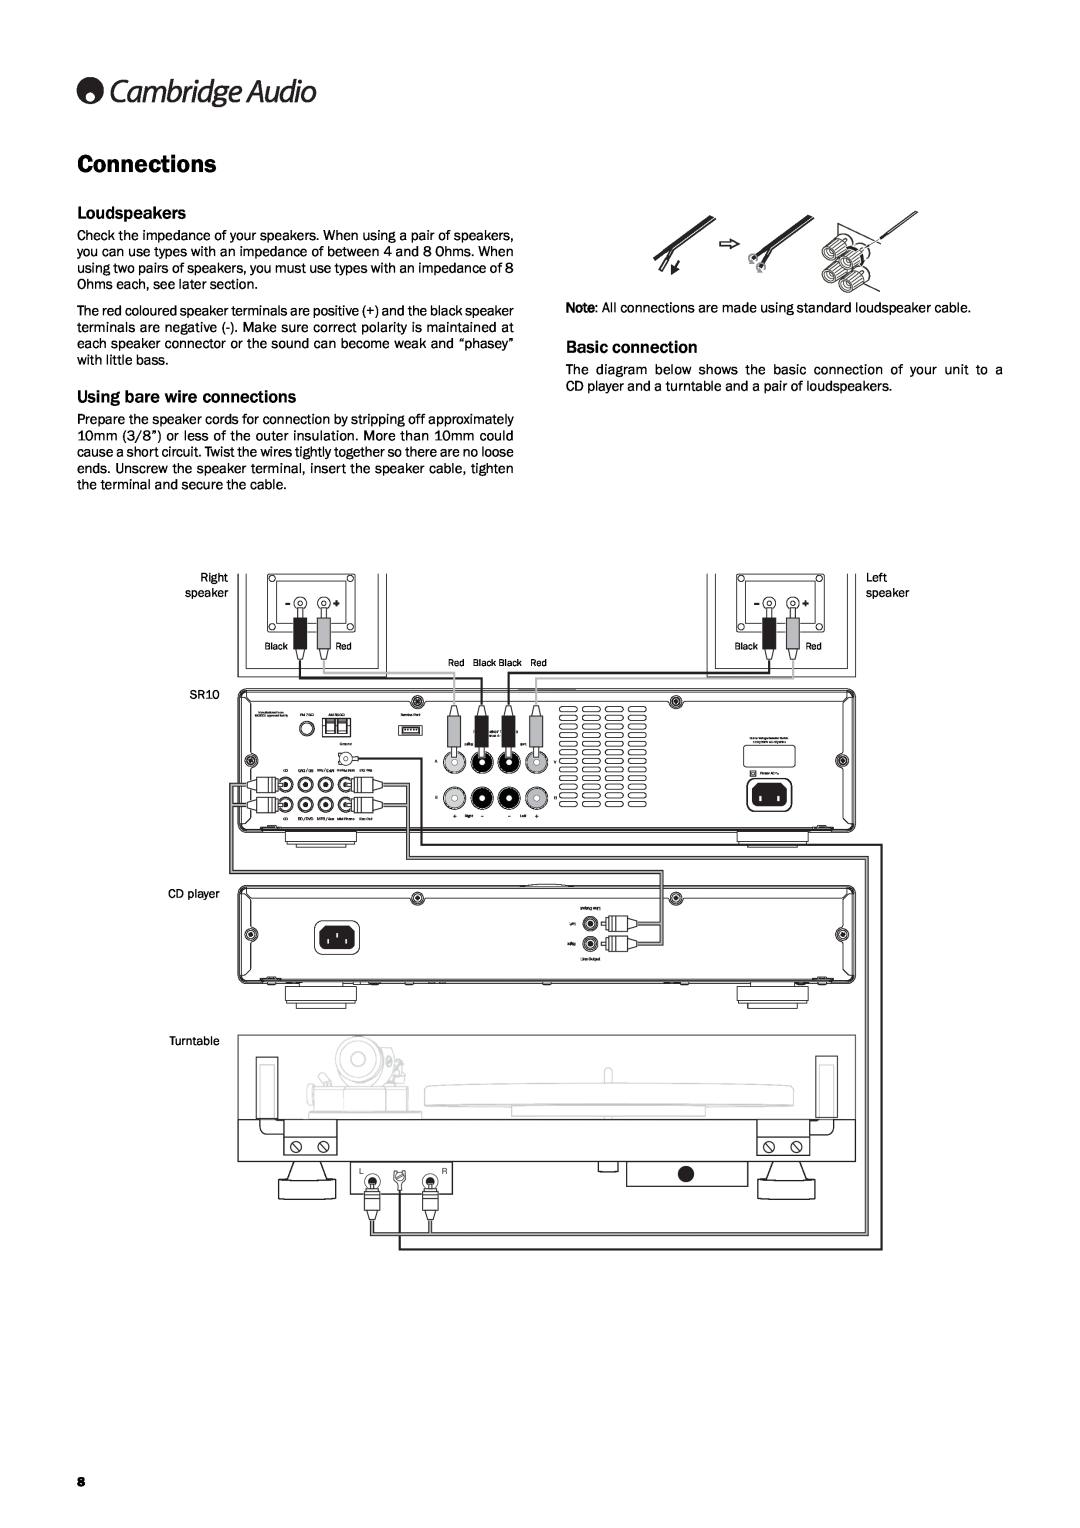 Cambridge Audio SR10 user manual Connections, Loudspeakers, Using bare wire connections, Basic connection 